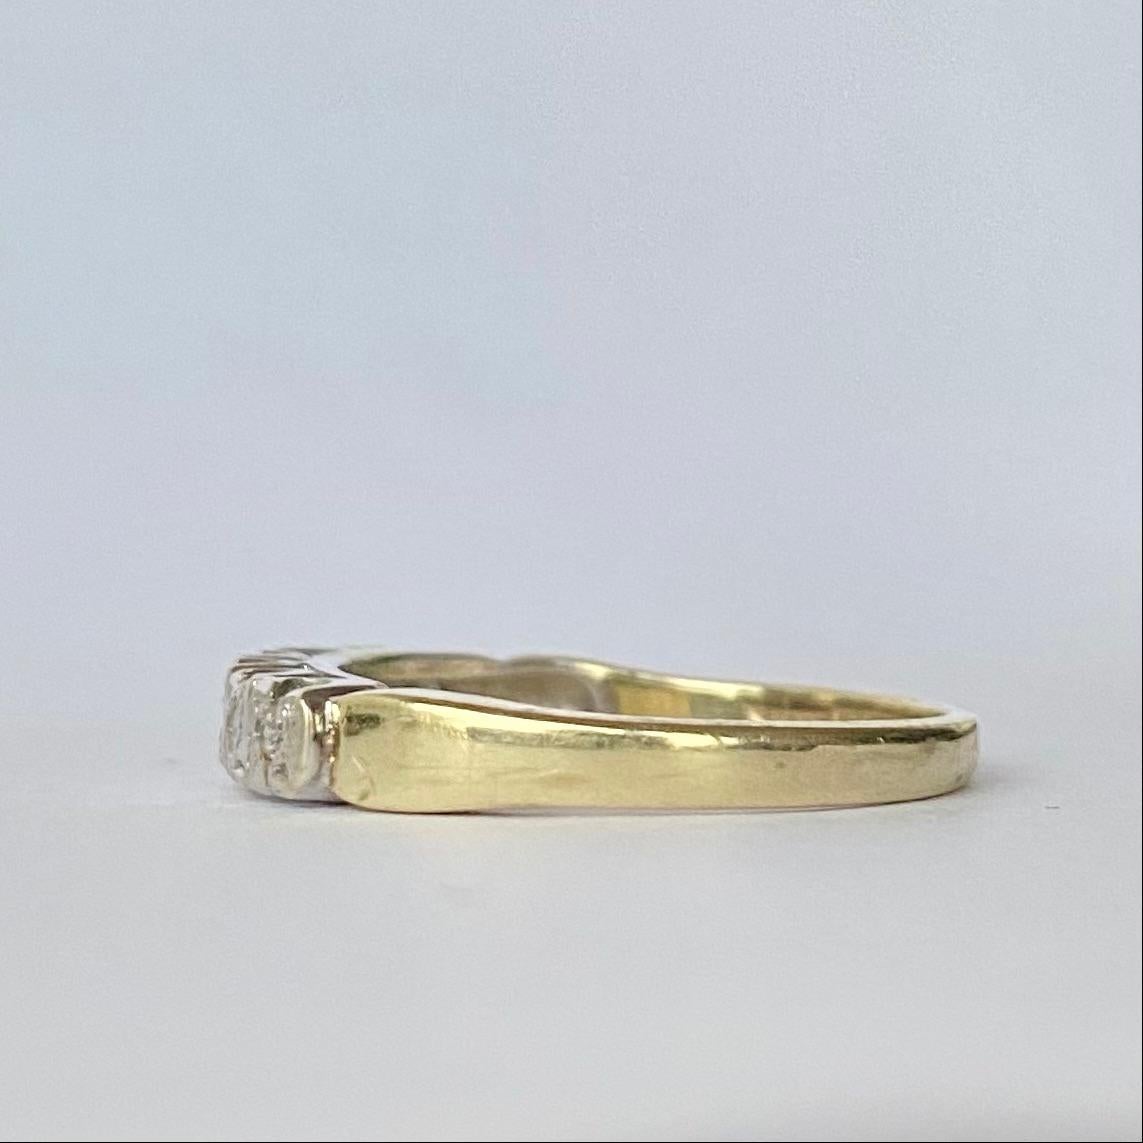 On top of this simple 18 Carat Gold band sits seven bright diamonds with a total weight of 20pts. Made in Birmingham, England. 

Ring Size: M or 6 1/4 
Band Width: 3.5mm

Weight: 2.9g